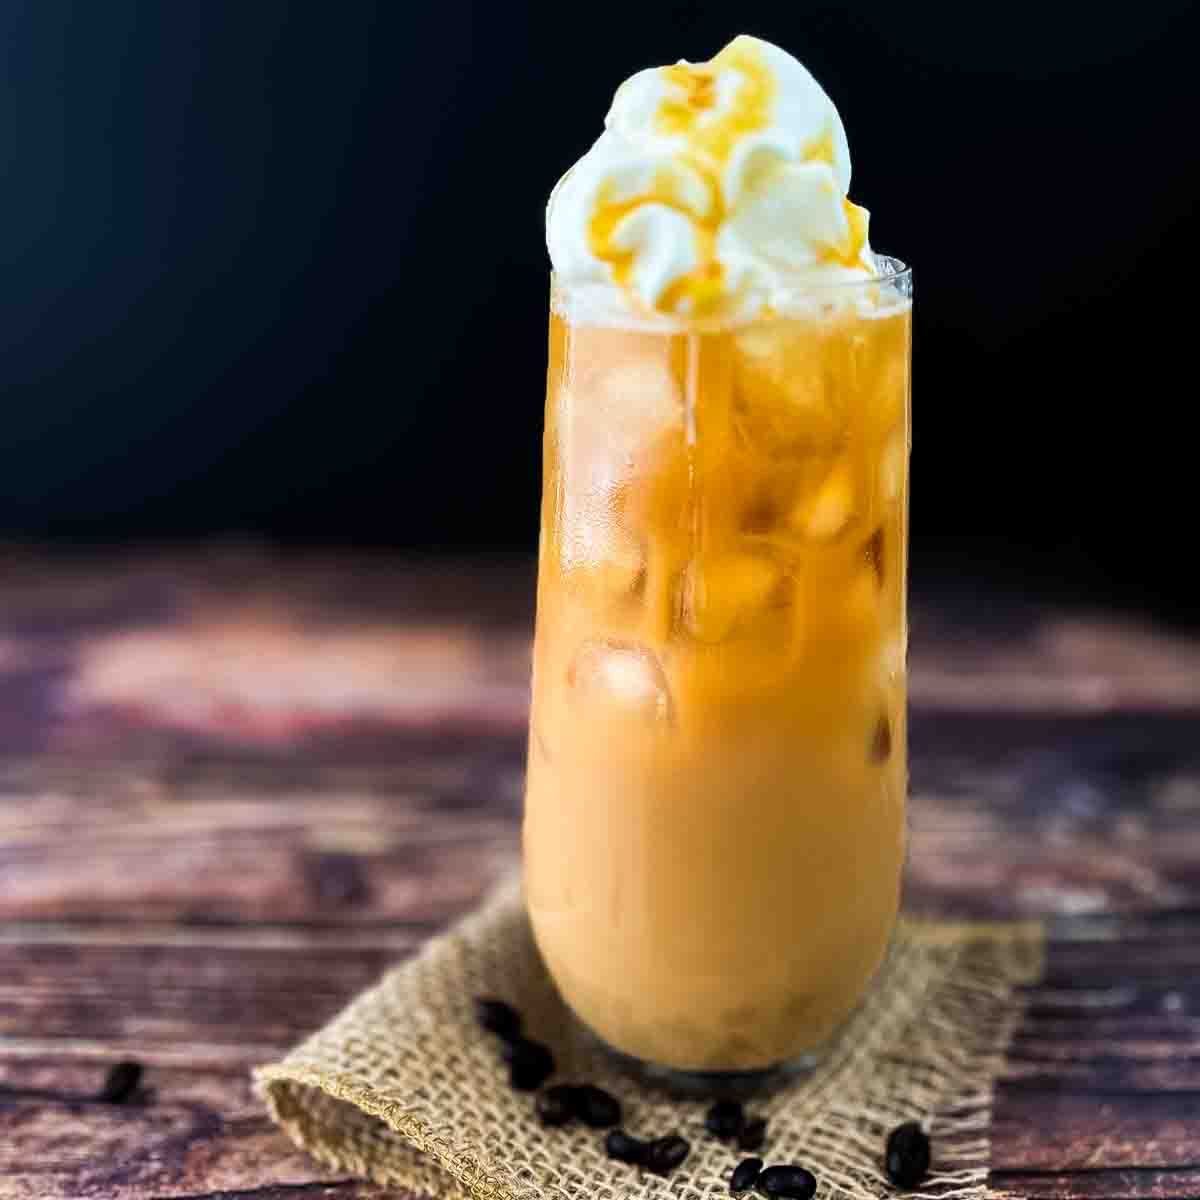 A tall glass of caramel iced coffee topped with whipped cream and caramel syrup.